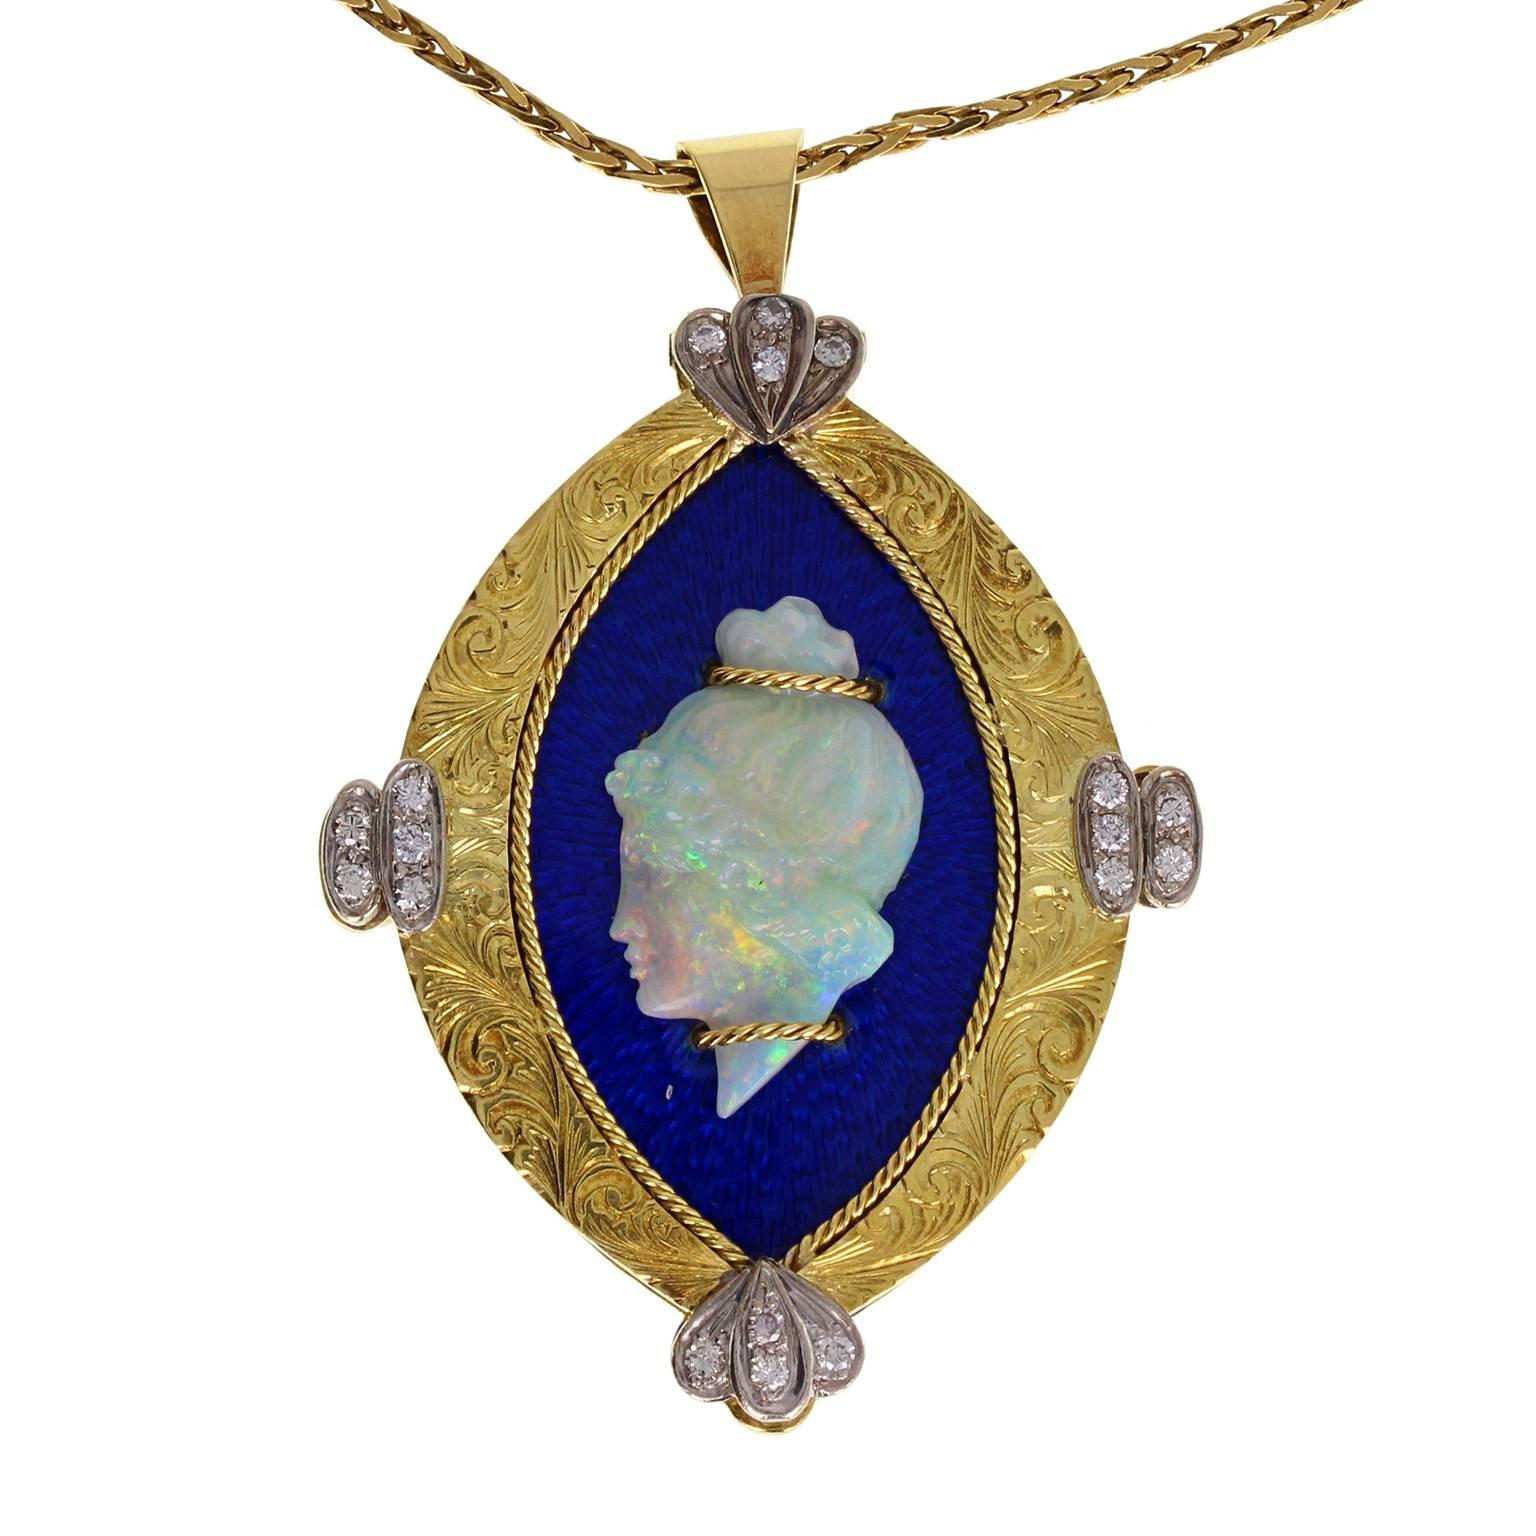 A stylish pendant comprising a carved opal head of a woman, adored with gold, mounted on a blue enamel freize, bordered with an engraved 18 carat gold border, featuring diamond set trefoil detailing. Hallmarked 1974, London. Brooch fitting to rear